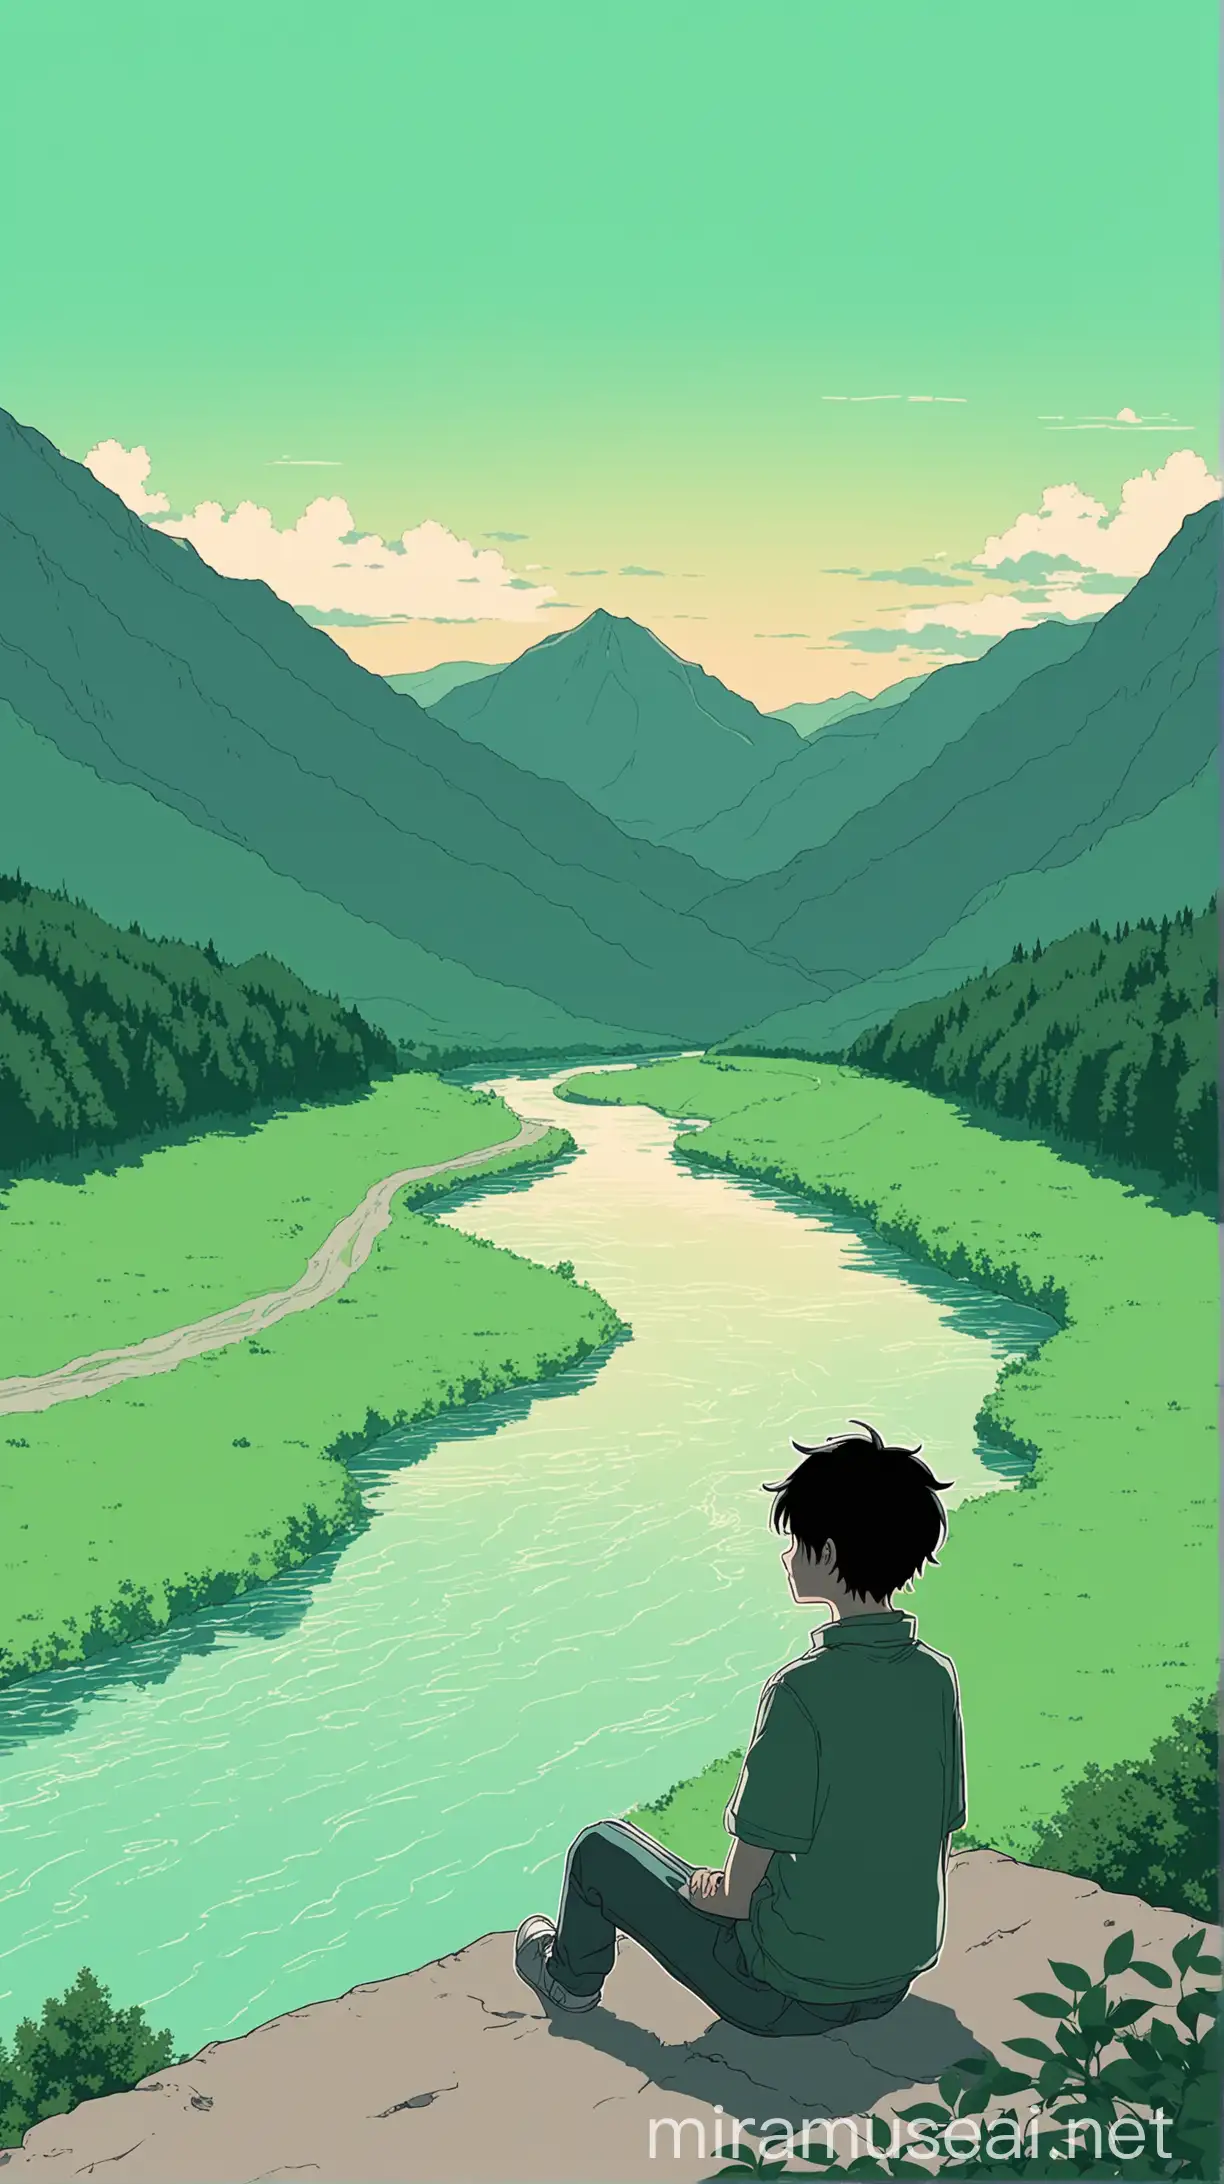 Tranquil Anime Boy Contemplating by the Riverside in Serene Nature Setting